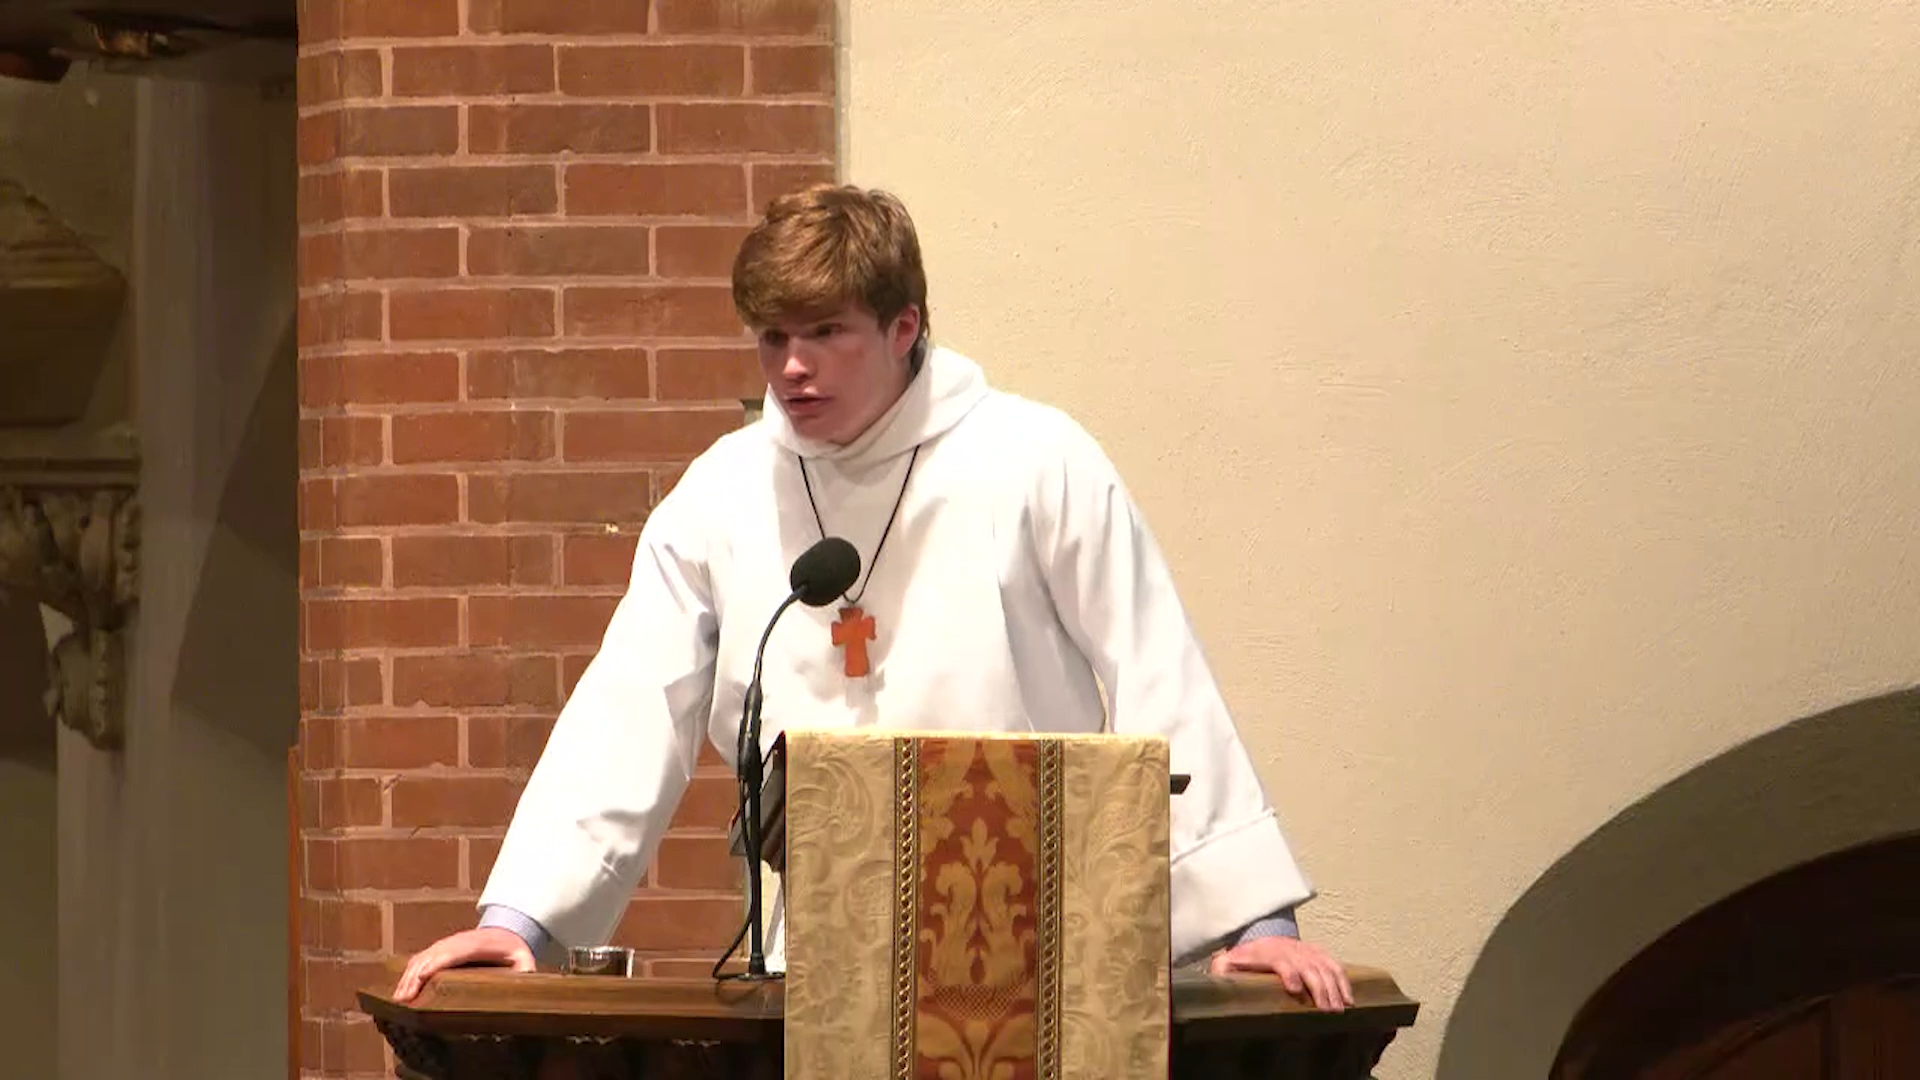 Fifth Sunday of Easter (8 a.m. Worship Service) - Jack Brumbaugh